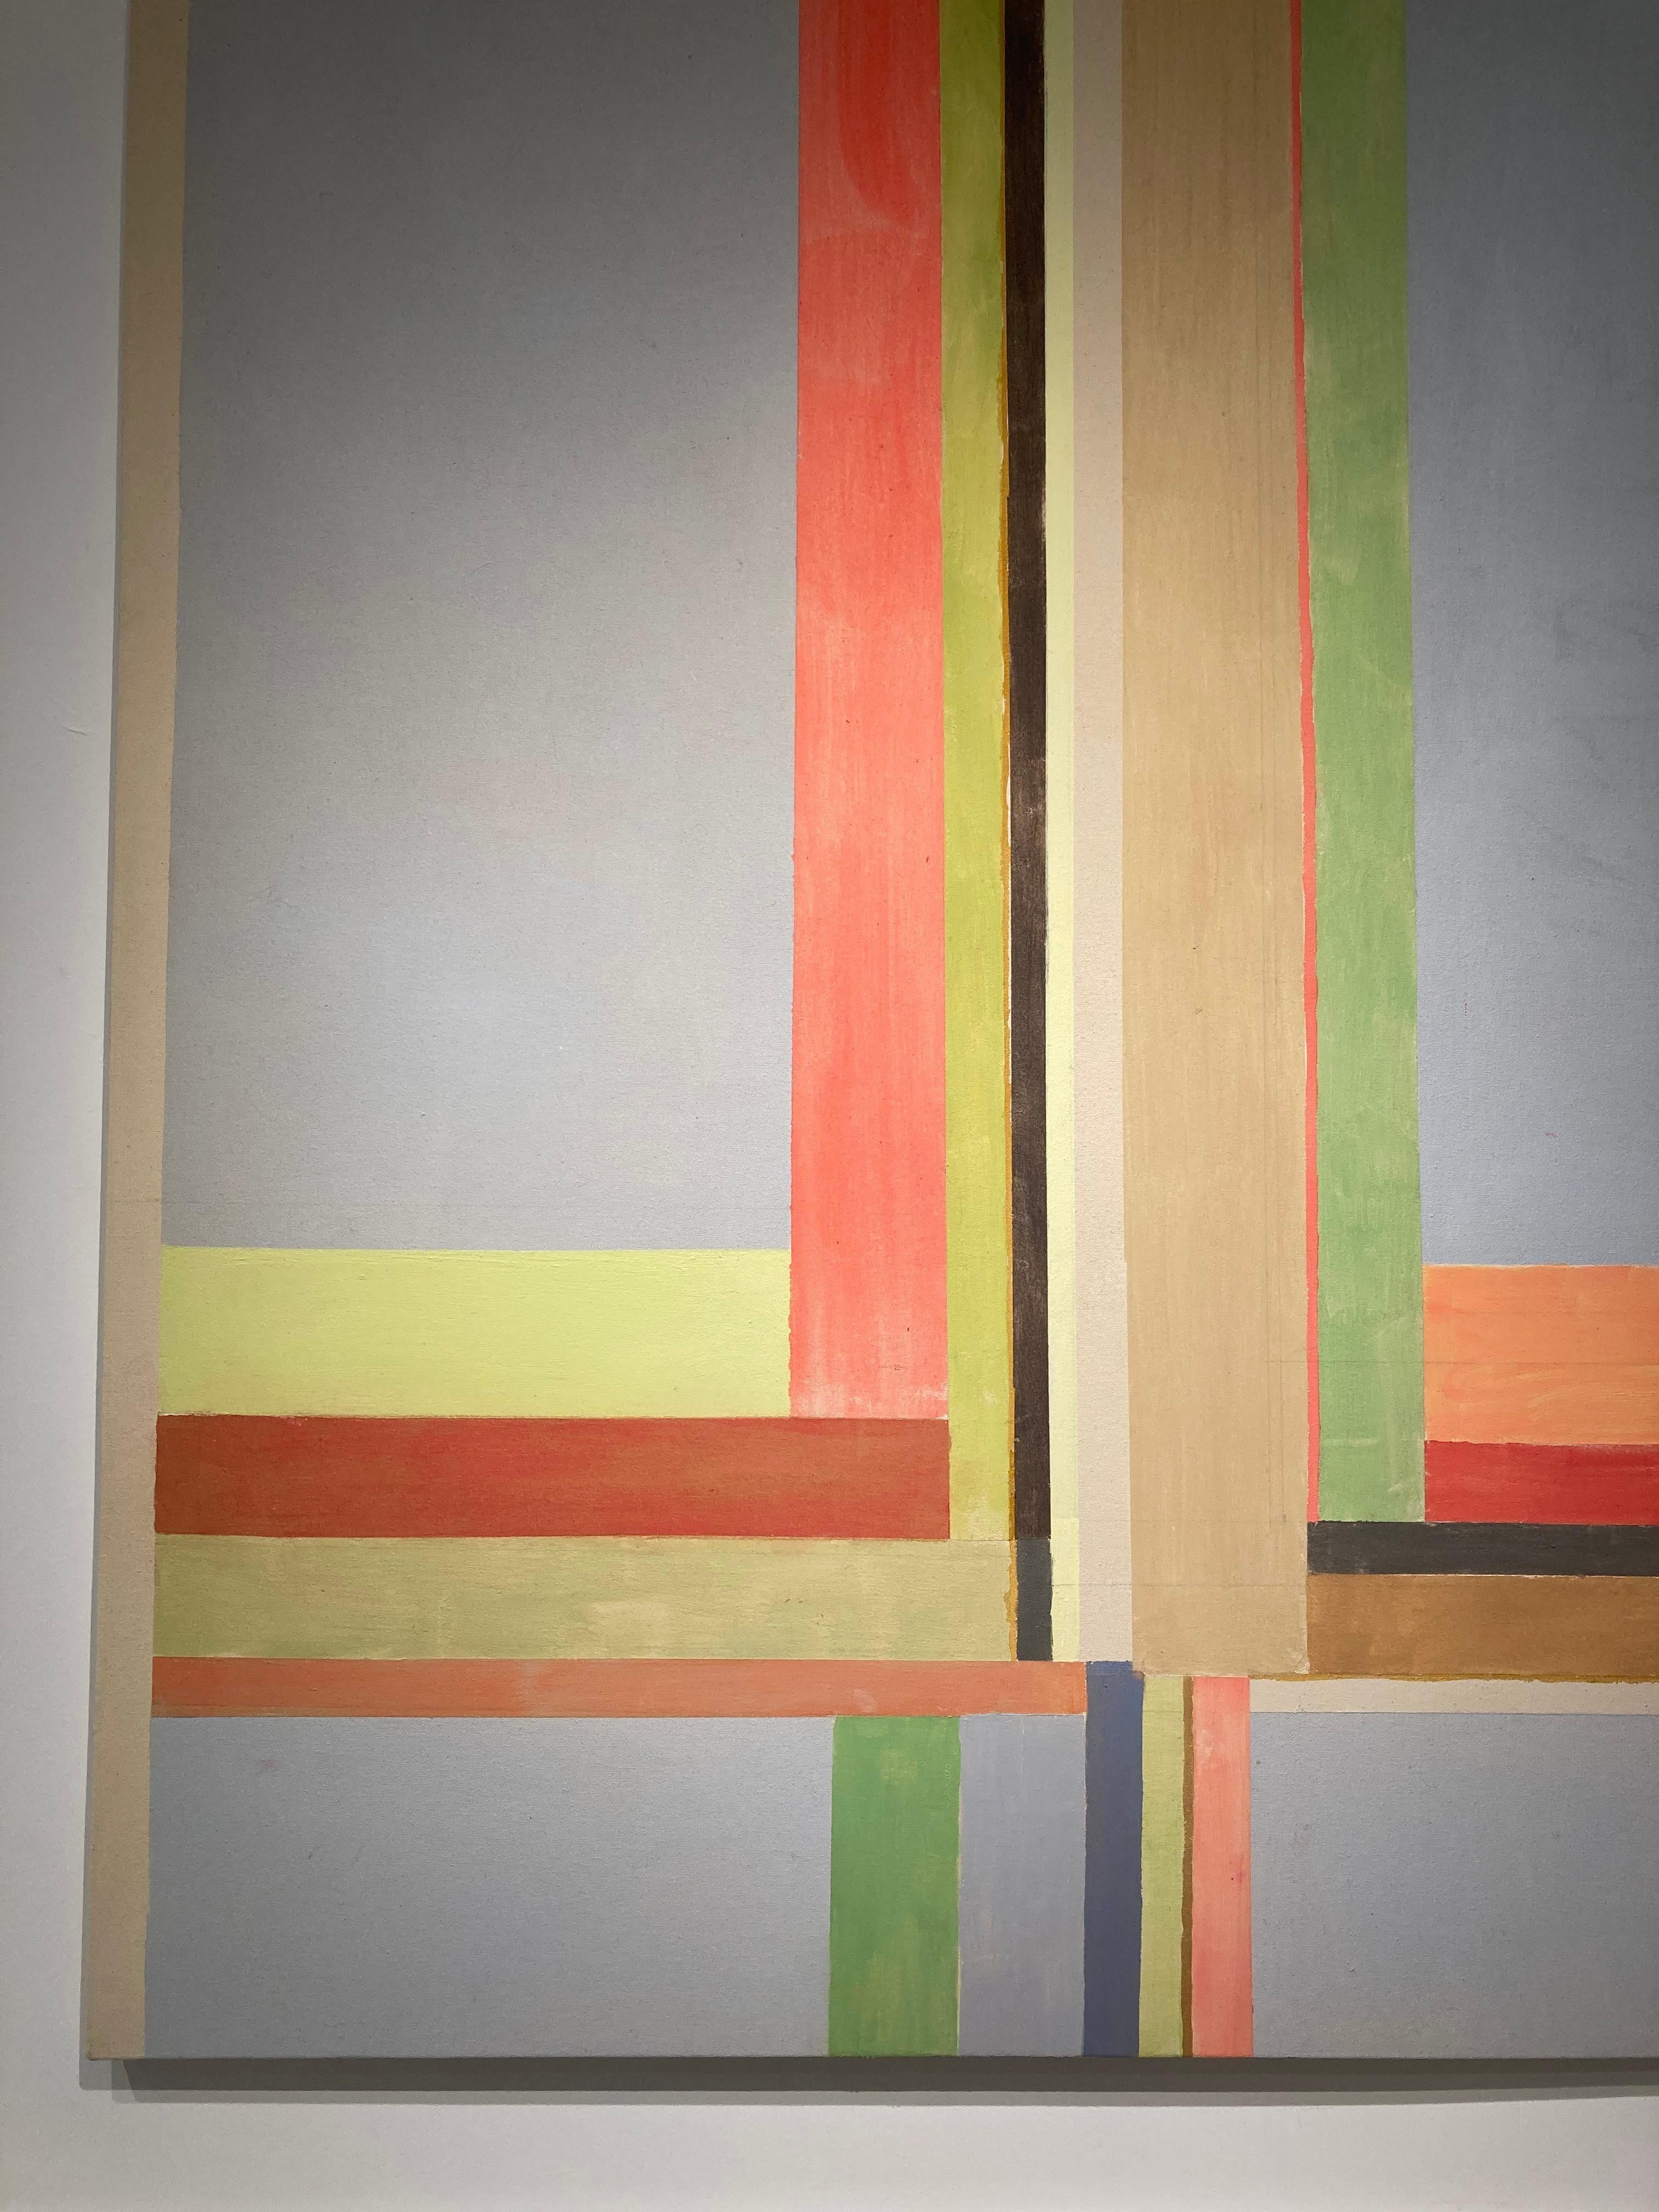 In this painting by Elizabeth Gourlay, clean and precise, carefully ordered stripes and blocks of color in orange, green, yellow, red and brown are warm and vibrant against the soft gray and beige background. Signed, dated and titled on